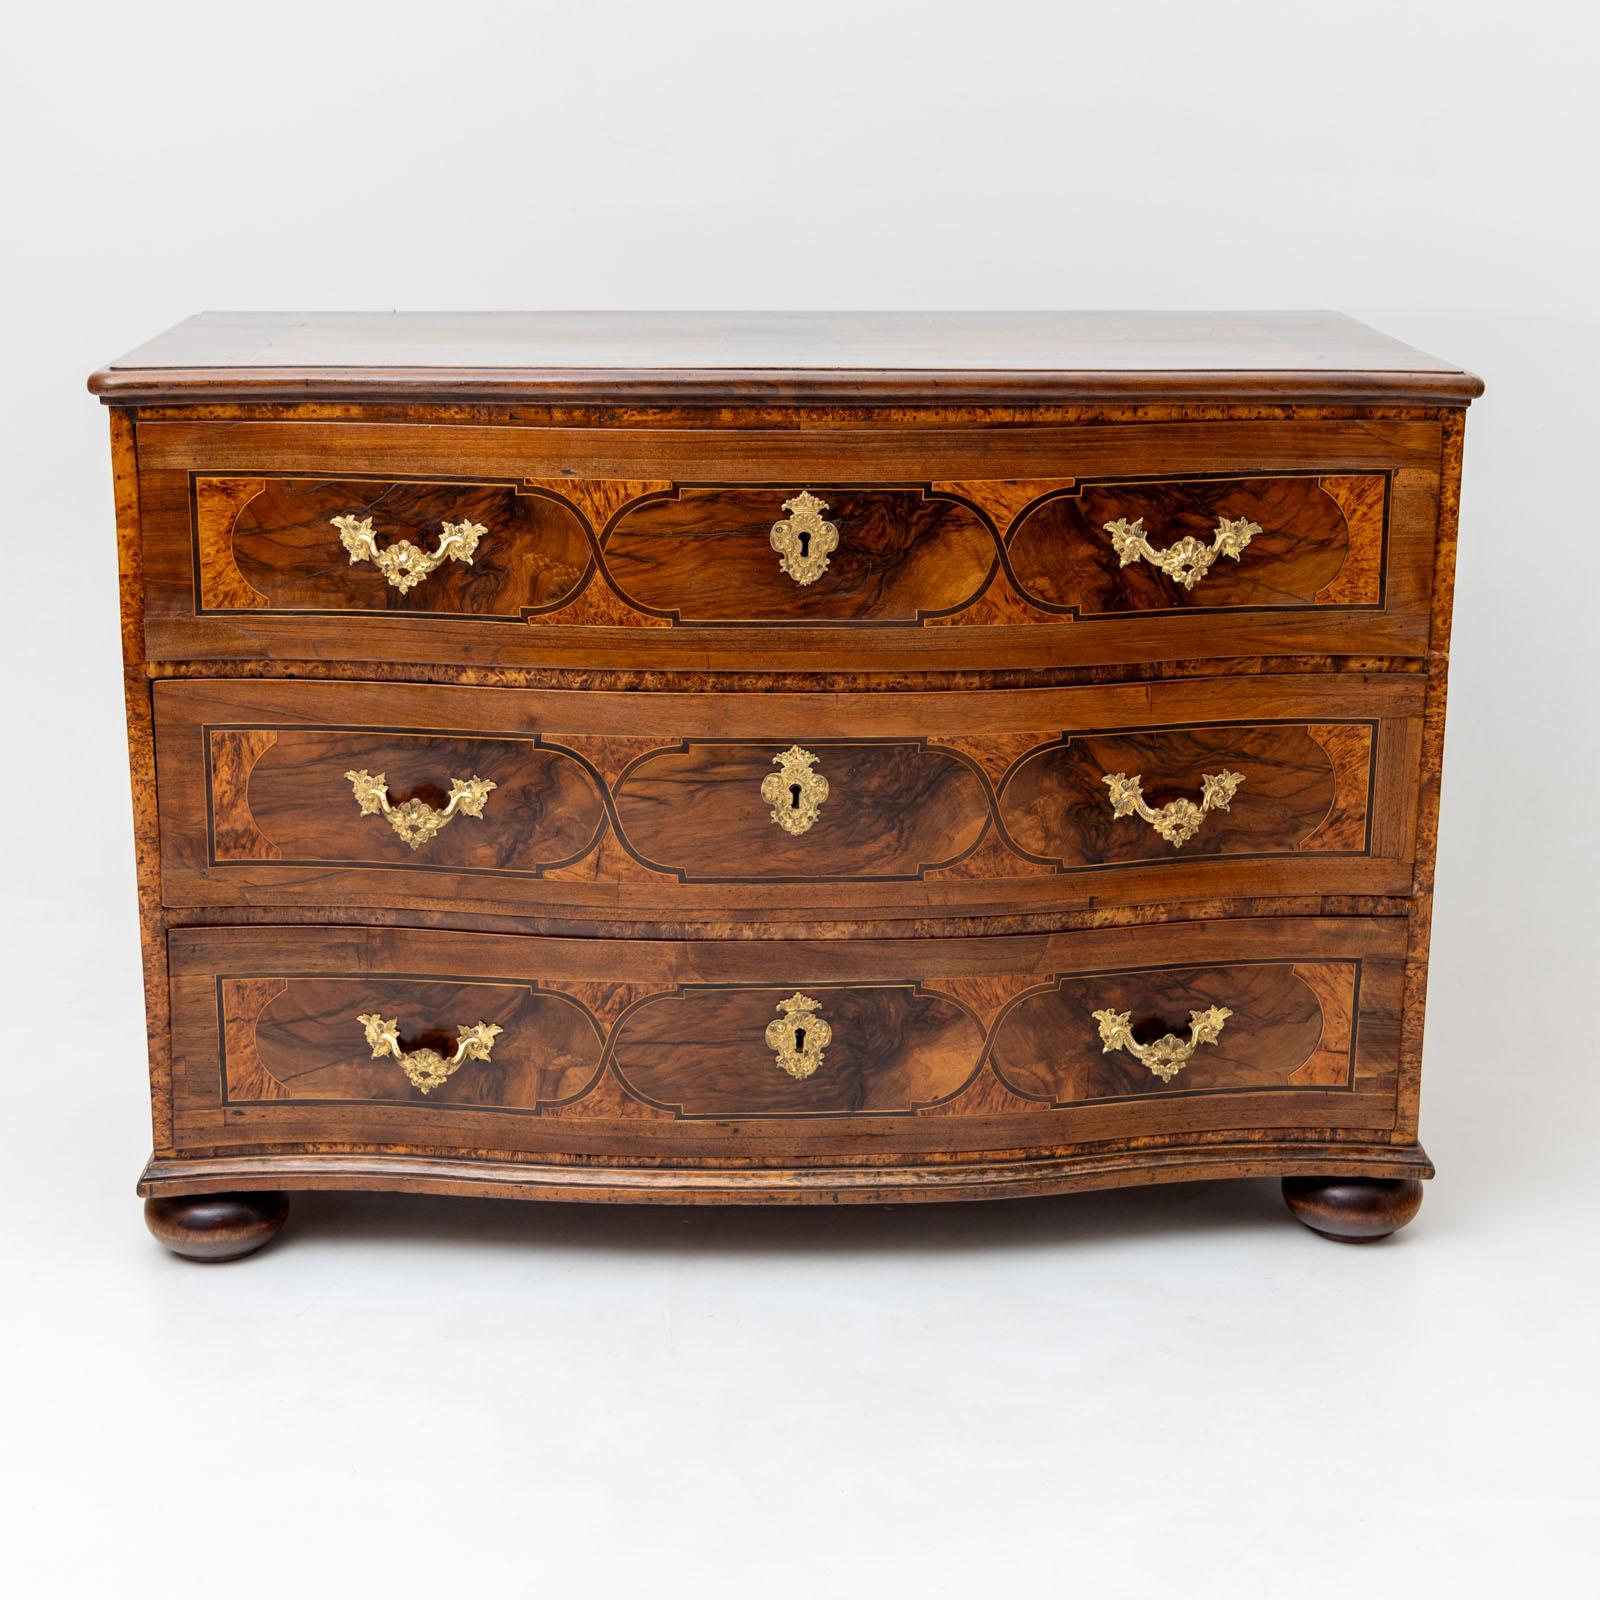 German Baroque Chest of Drawers in Walnut, Inlaywork and Bronze fittings, Mid-18th C. For Sale